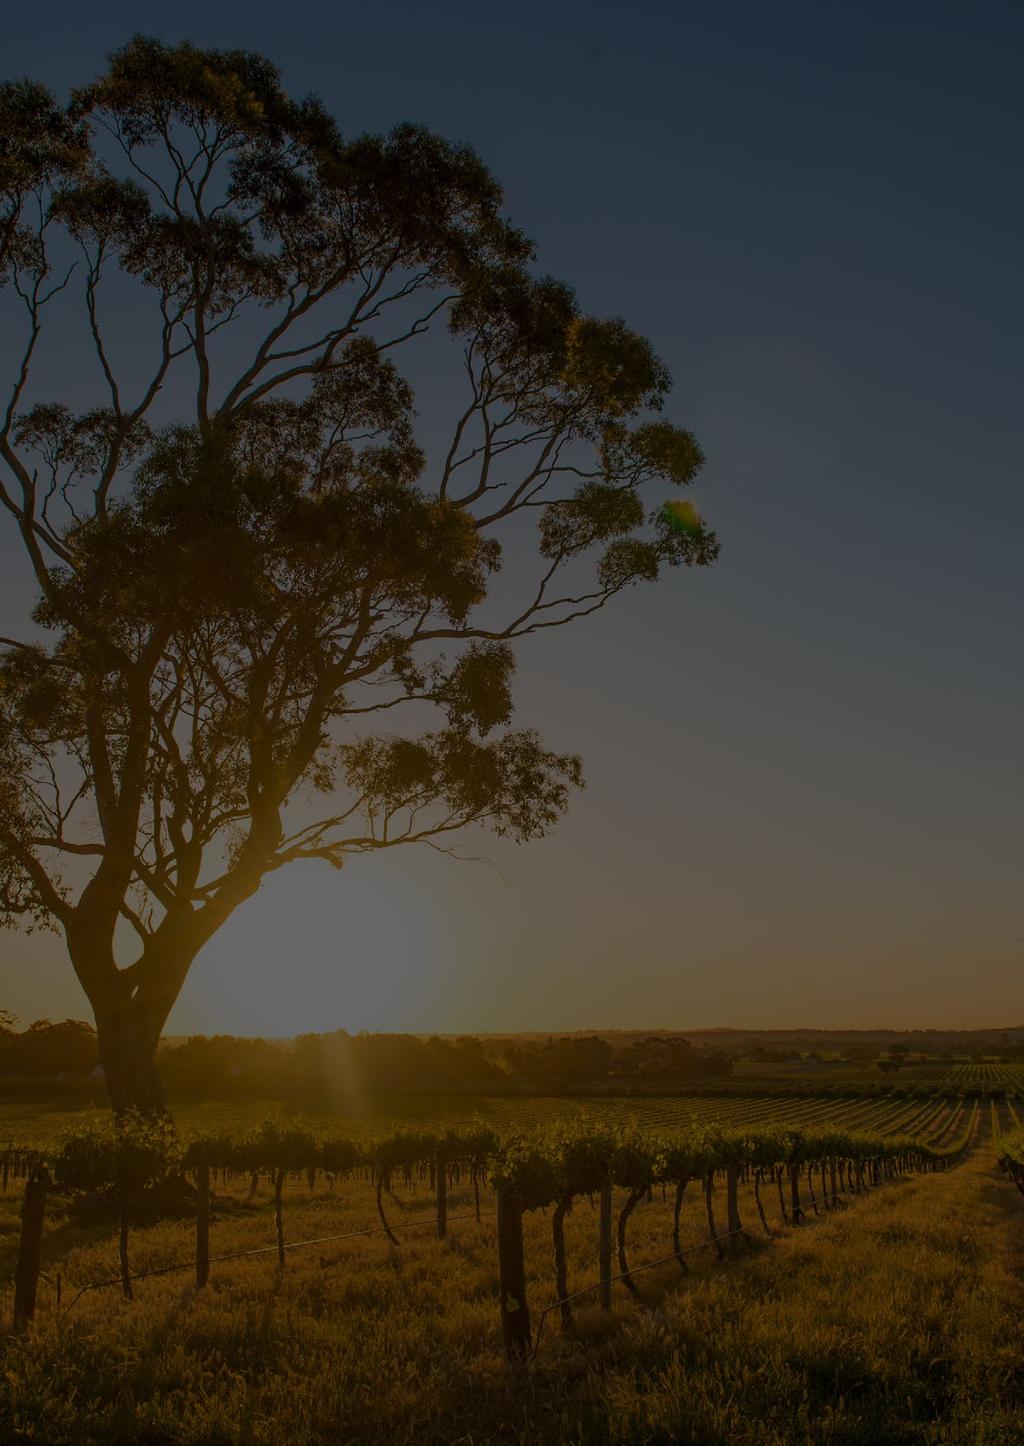 From the best of Tasmania, it s now time to jet across to The Barossa Valley. WING YOUR WAY FROM SAFFIRE TO THE IDYLLIC LUXURY OF A VINEYARD RETREAT AT The Barossa Valley.